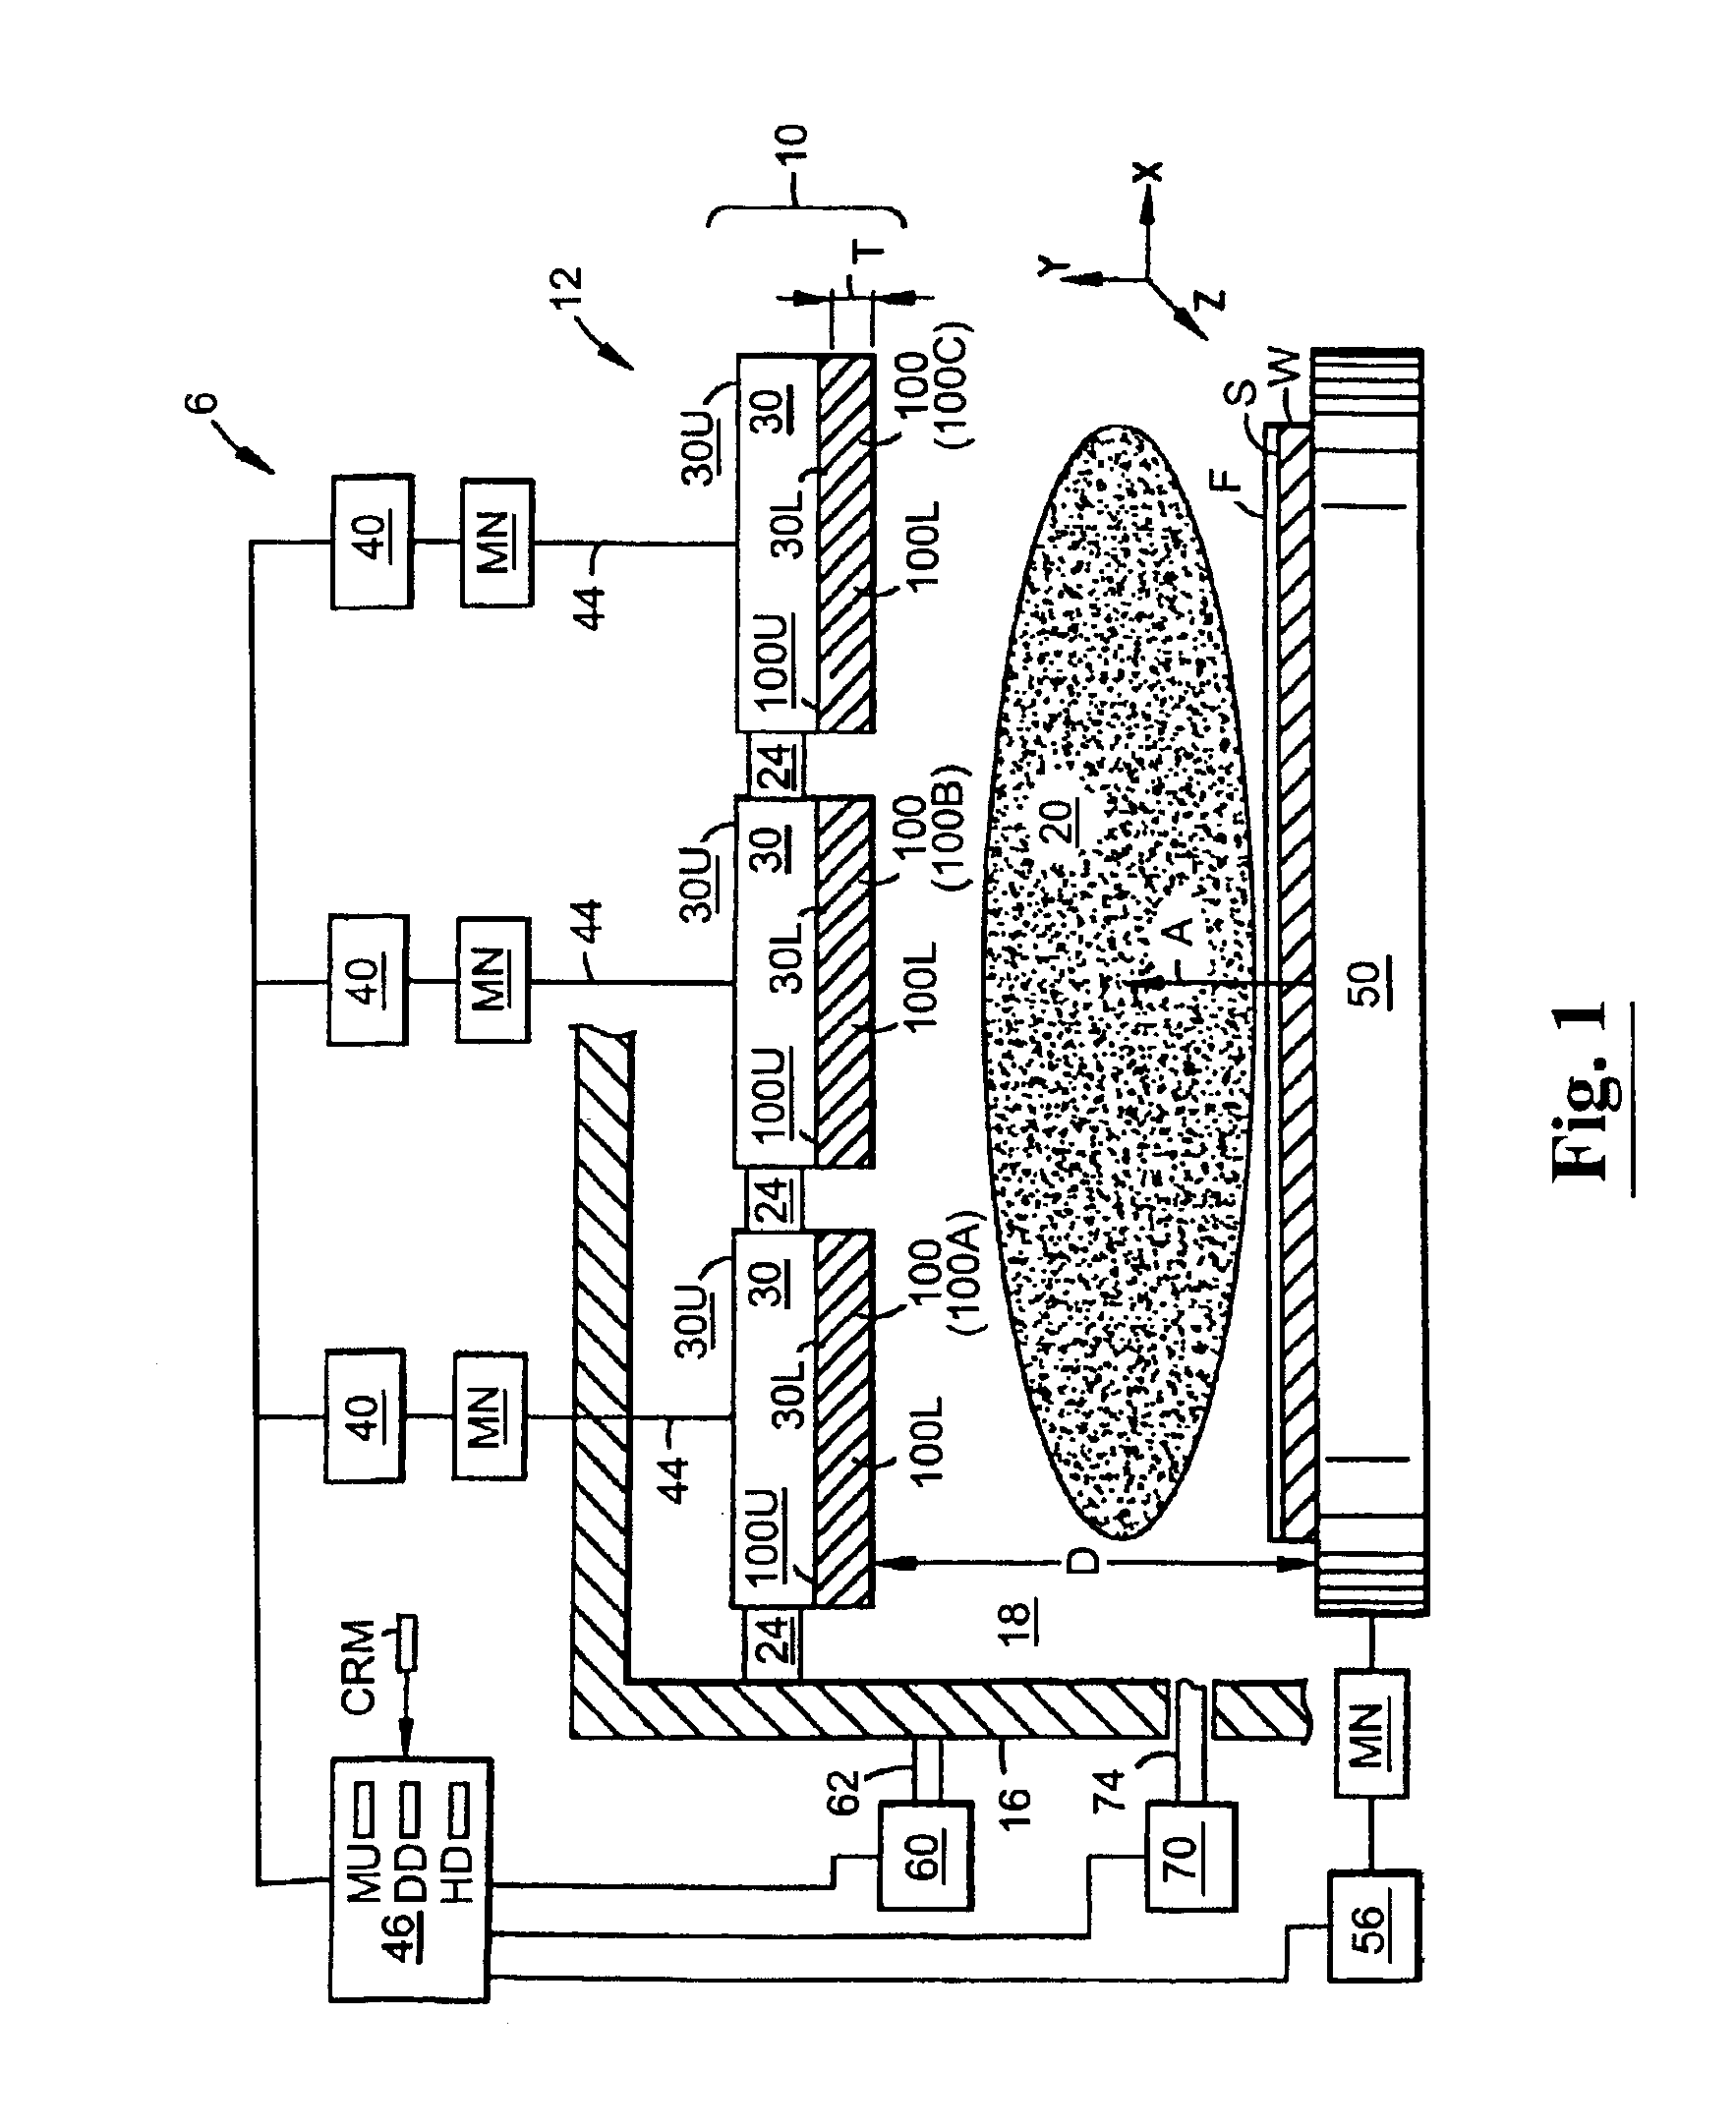 Method of adjusting the thickness of an electrode in a plasma processing system